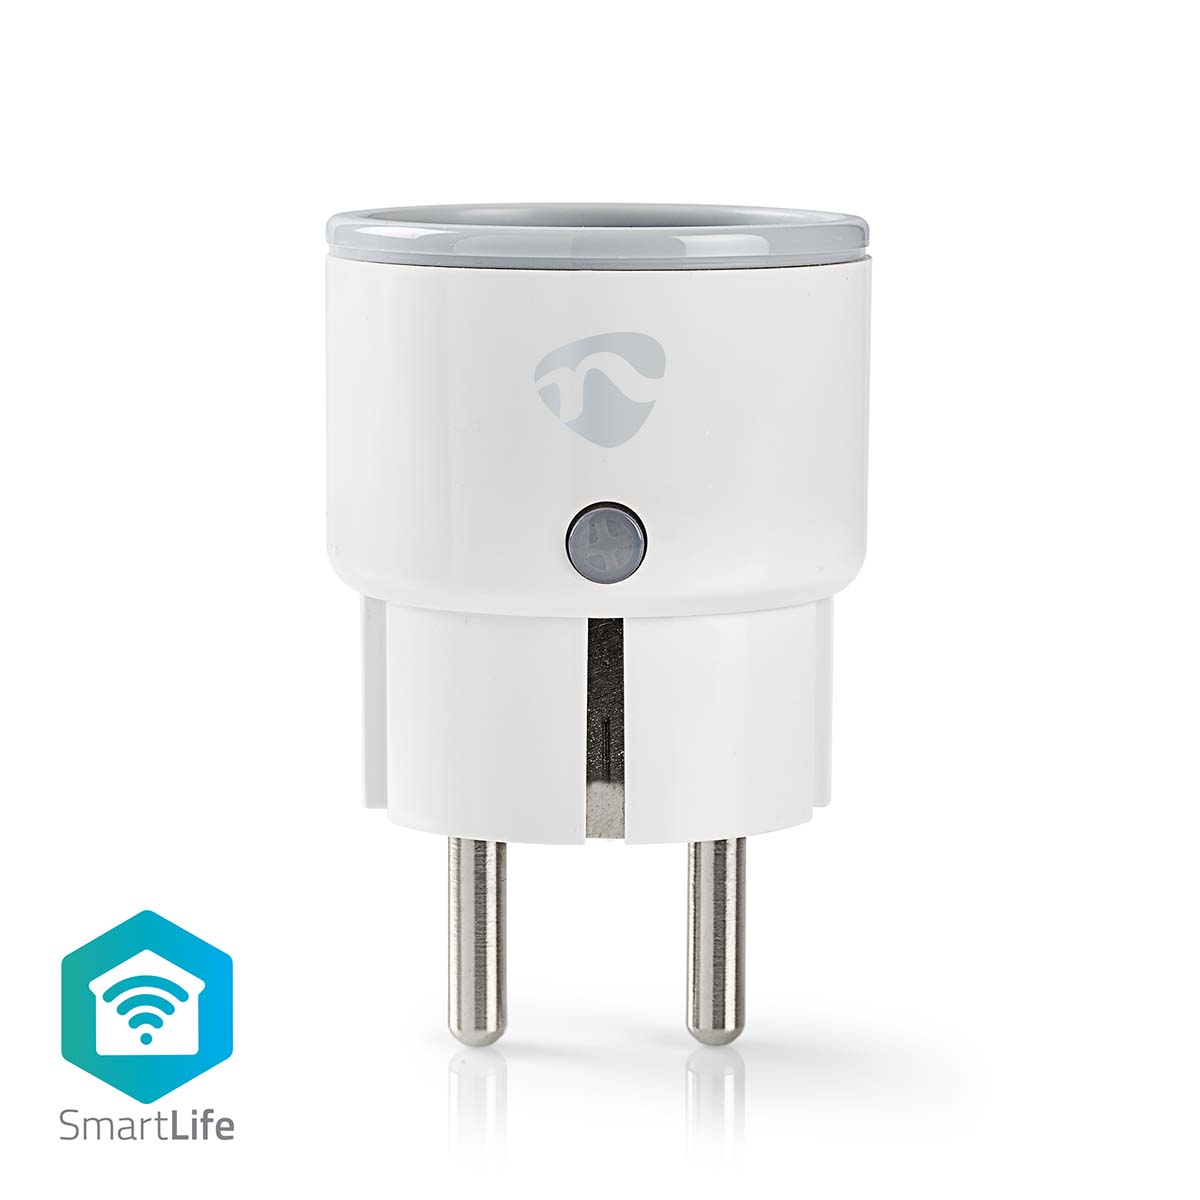 Smart Plug with Consumption Meter and App